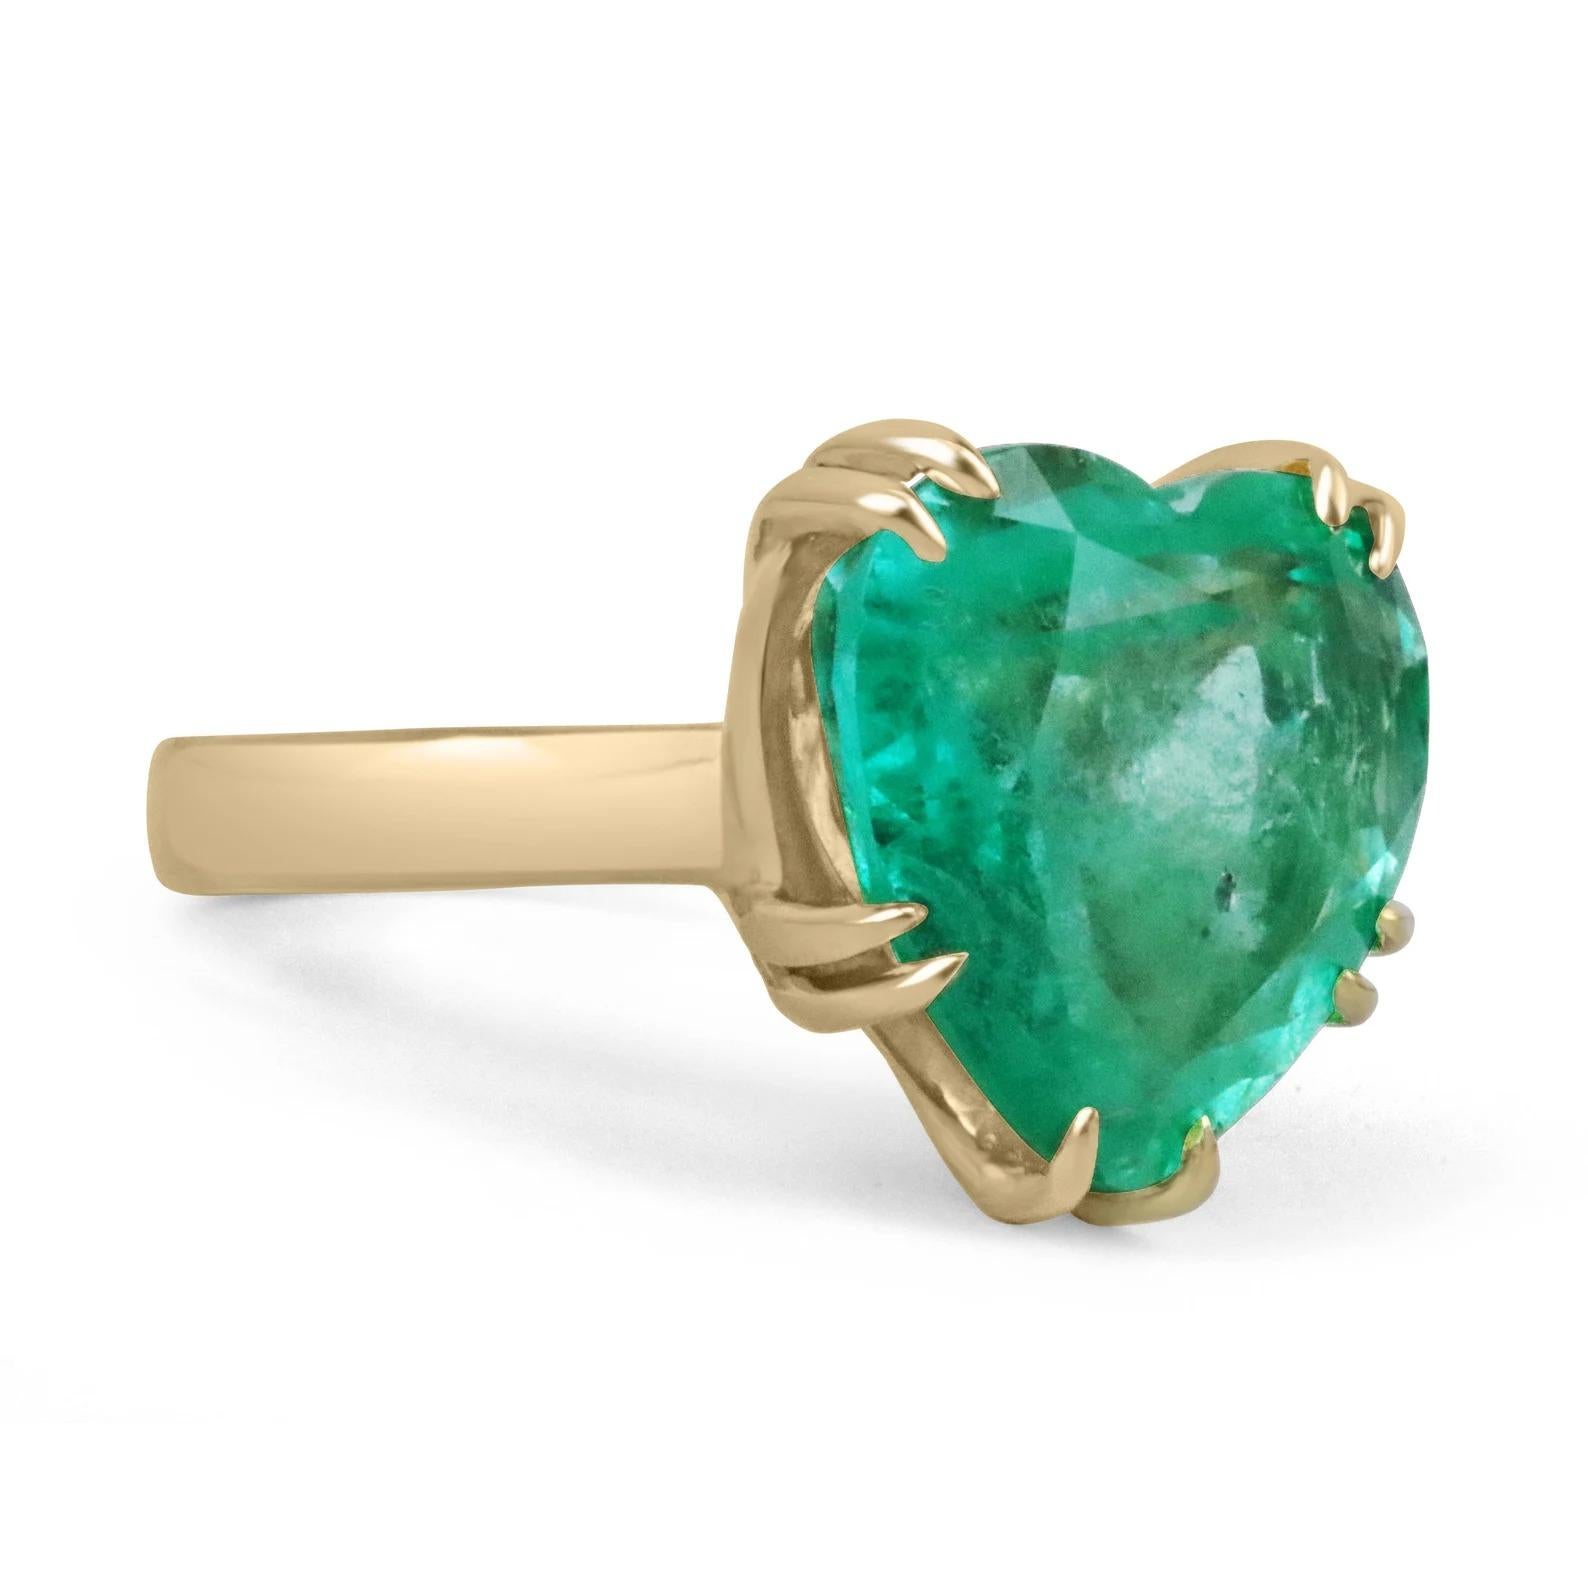 A jaw-dropping emerald solitaire ring. This alluring, and massive piece features a one-of-a-kind, natural 11.62-carat, heart-cut Colombian emerald with the most charming characteristics. The gemstone displays a mesmerizing vivid sea green color,